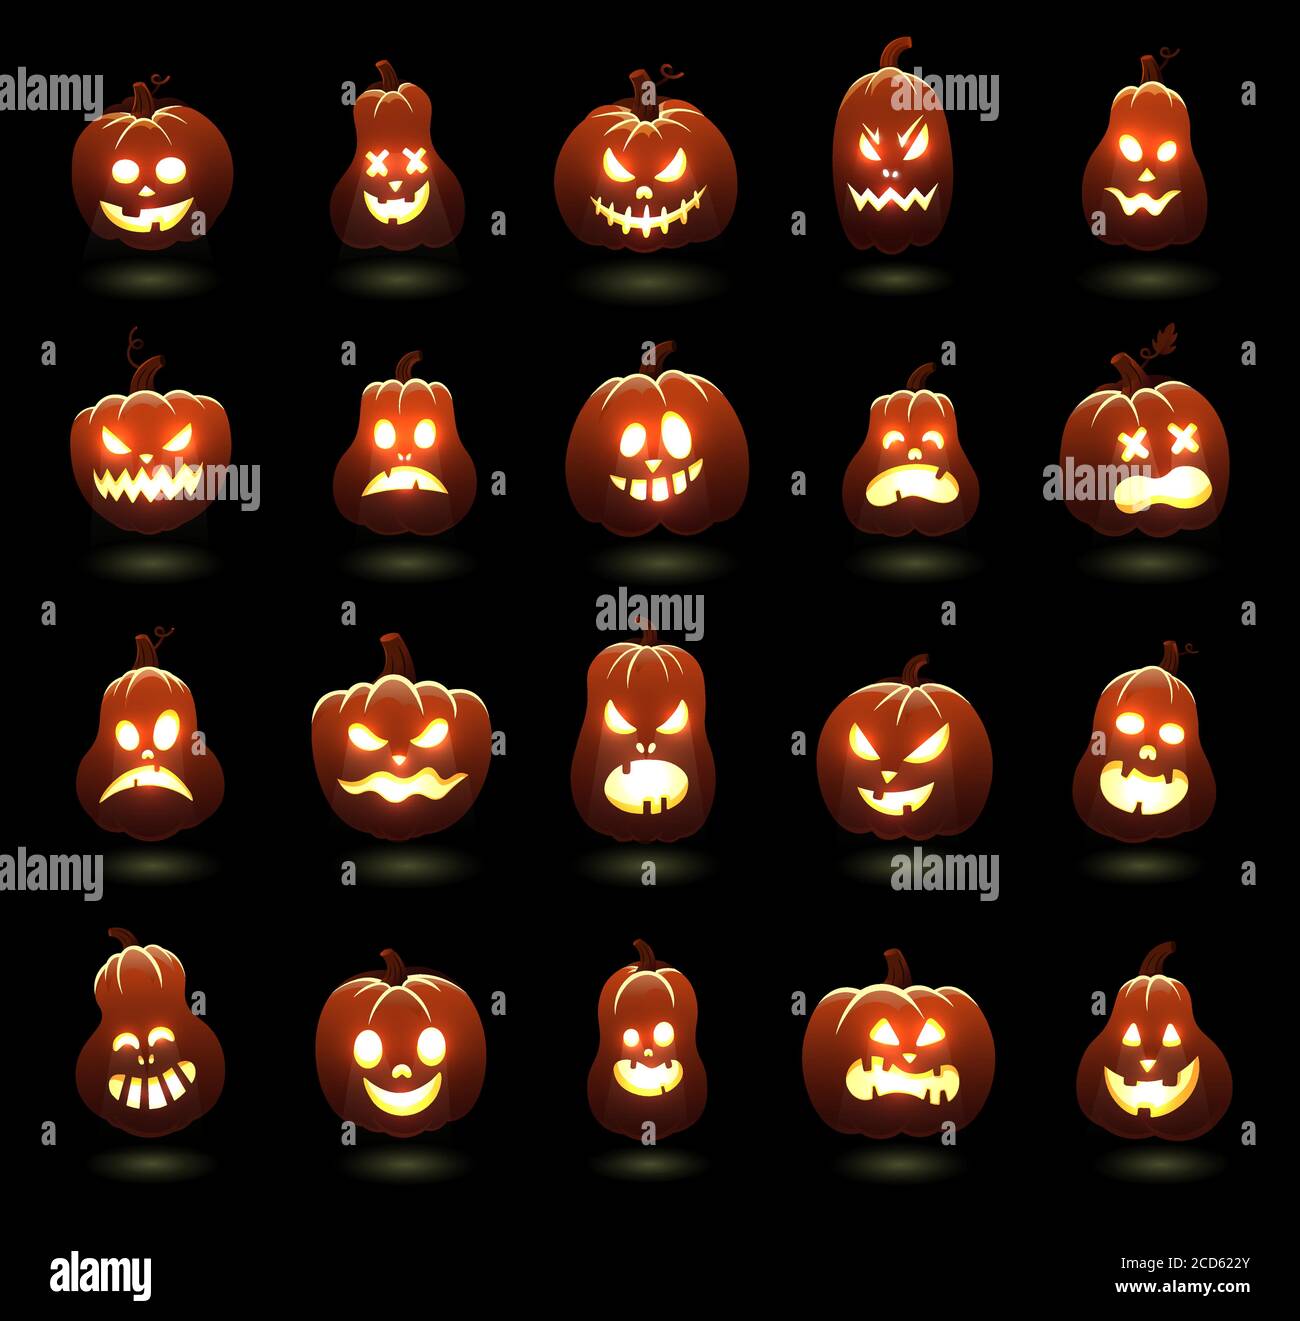 Carved pumpkin faces Stock Vector Images - Alamy